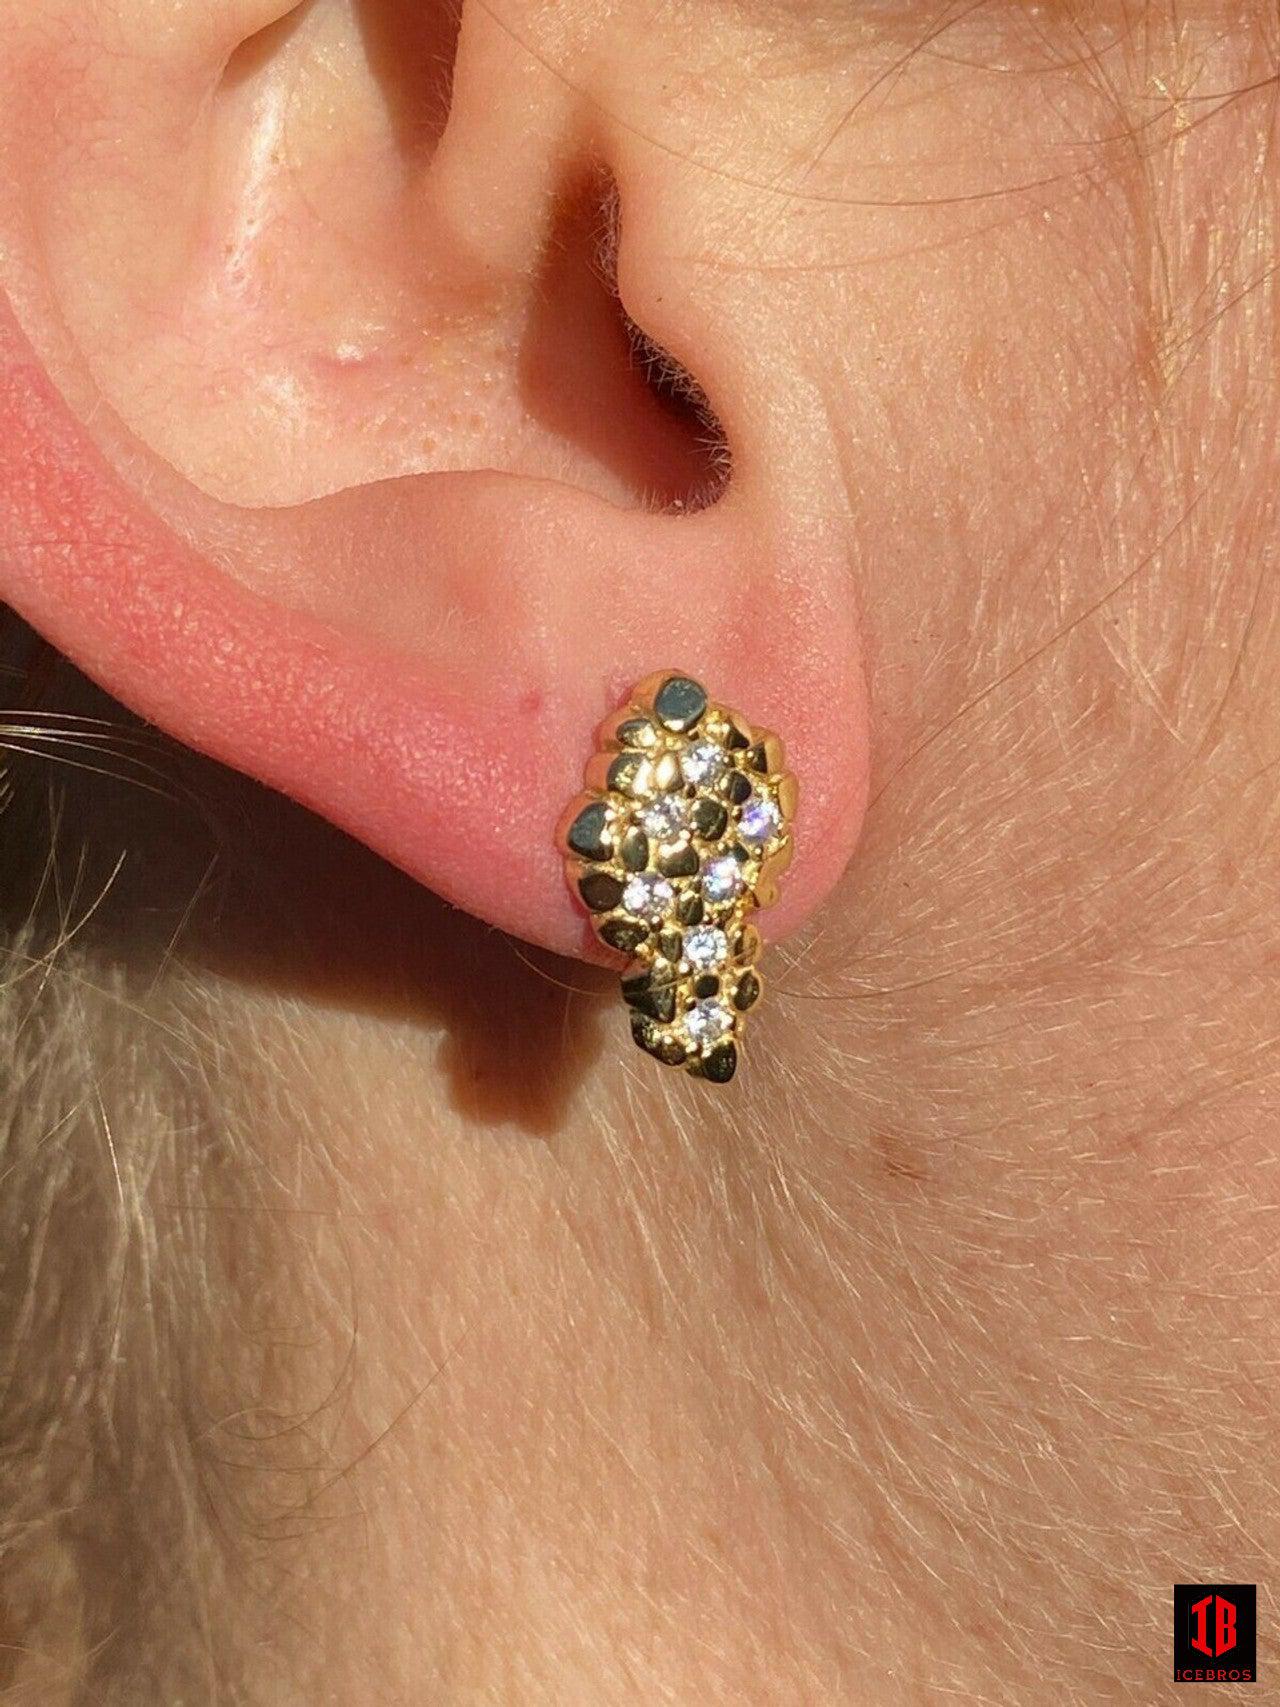 Mens Real Solid 925 Sterling Silver & 14k Gold Nugget Earrings Large Iced Studs